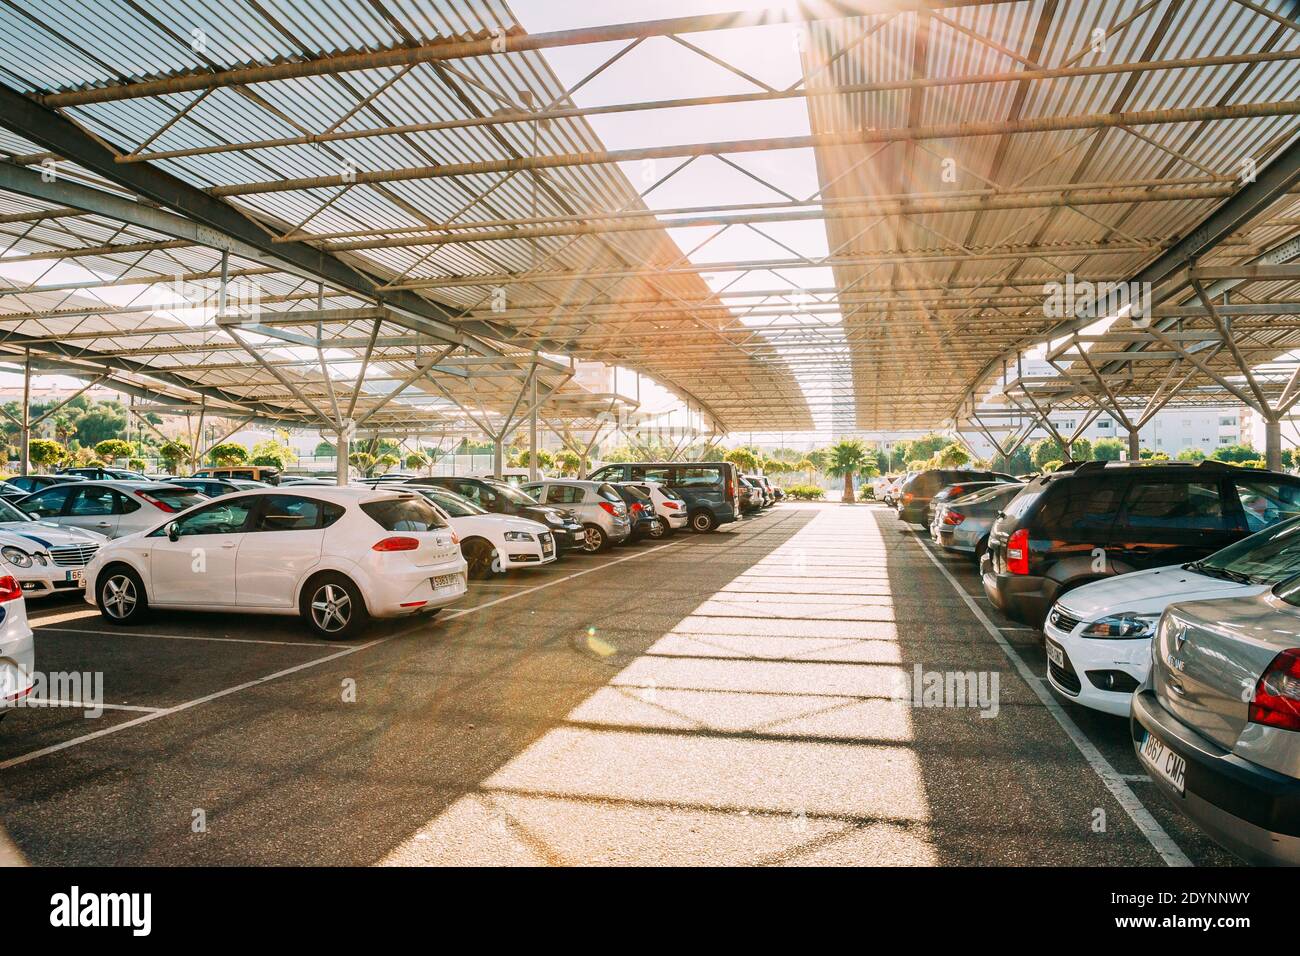 Cars on a covered parking lot in sunny summer day. Stock Photo